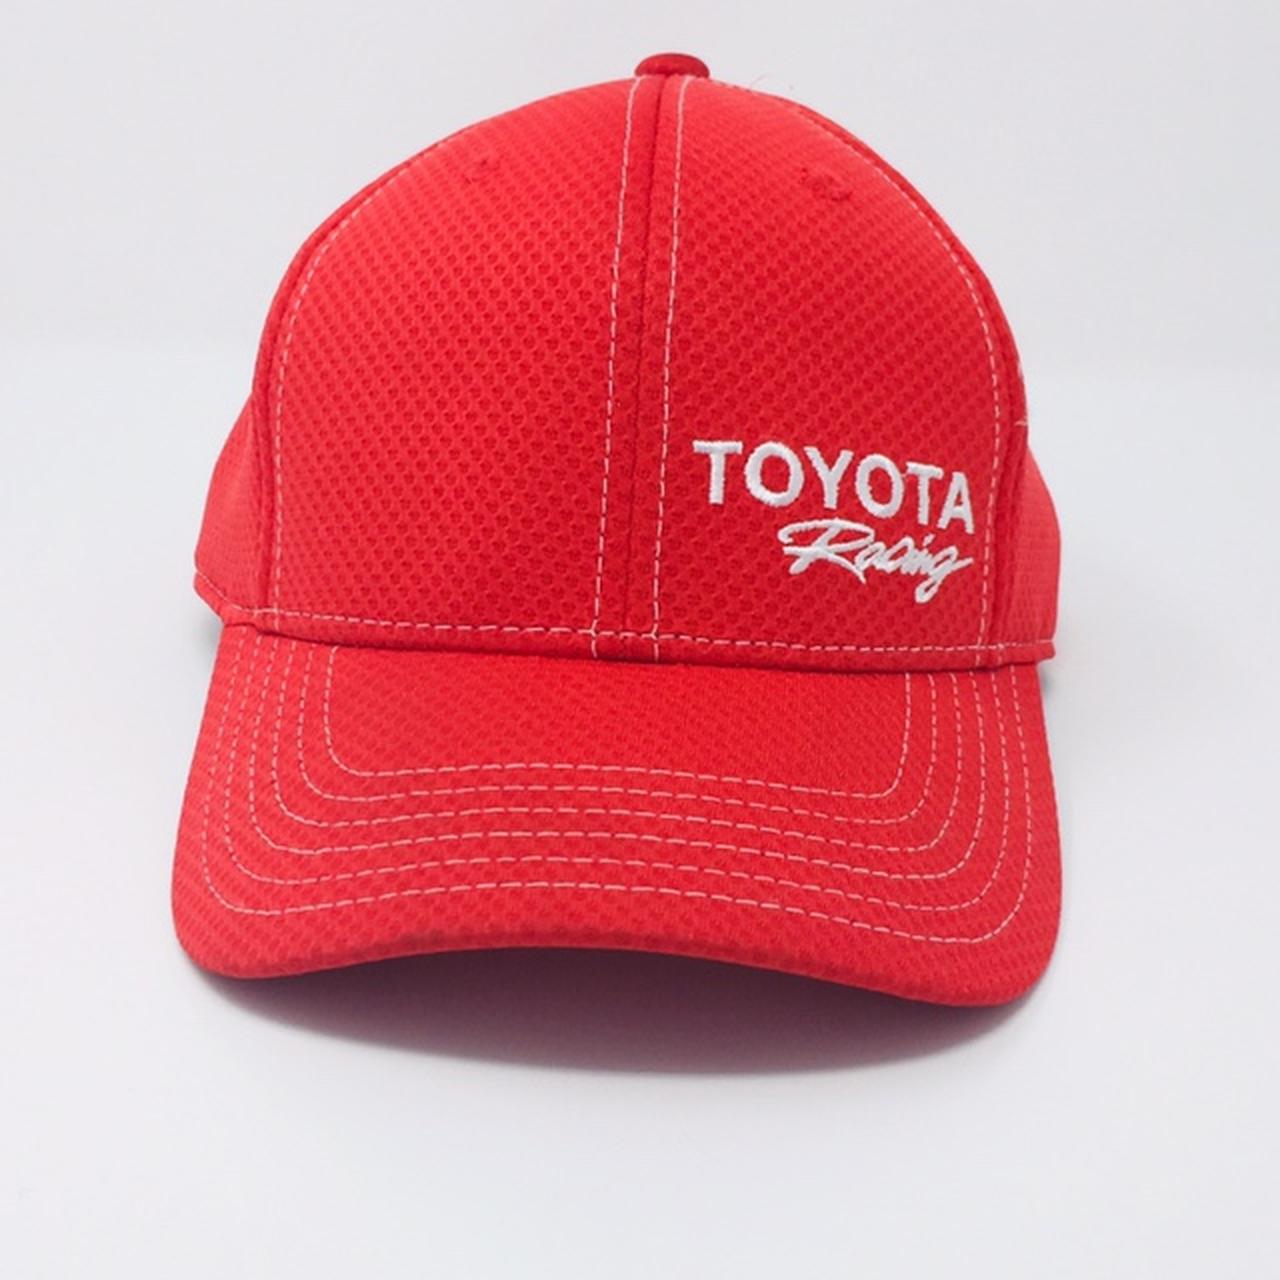 Toyota racing hat in perfect condition. One size